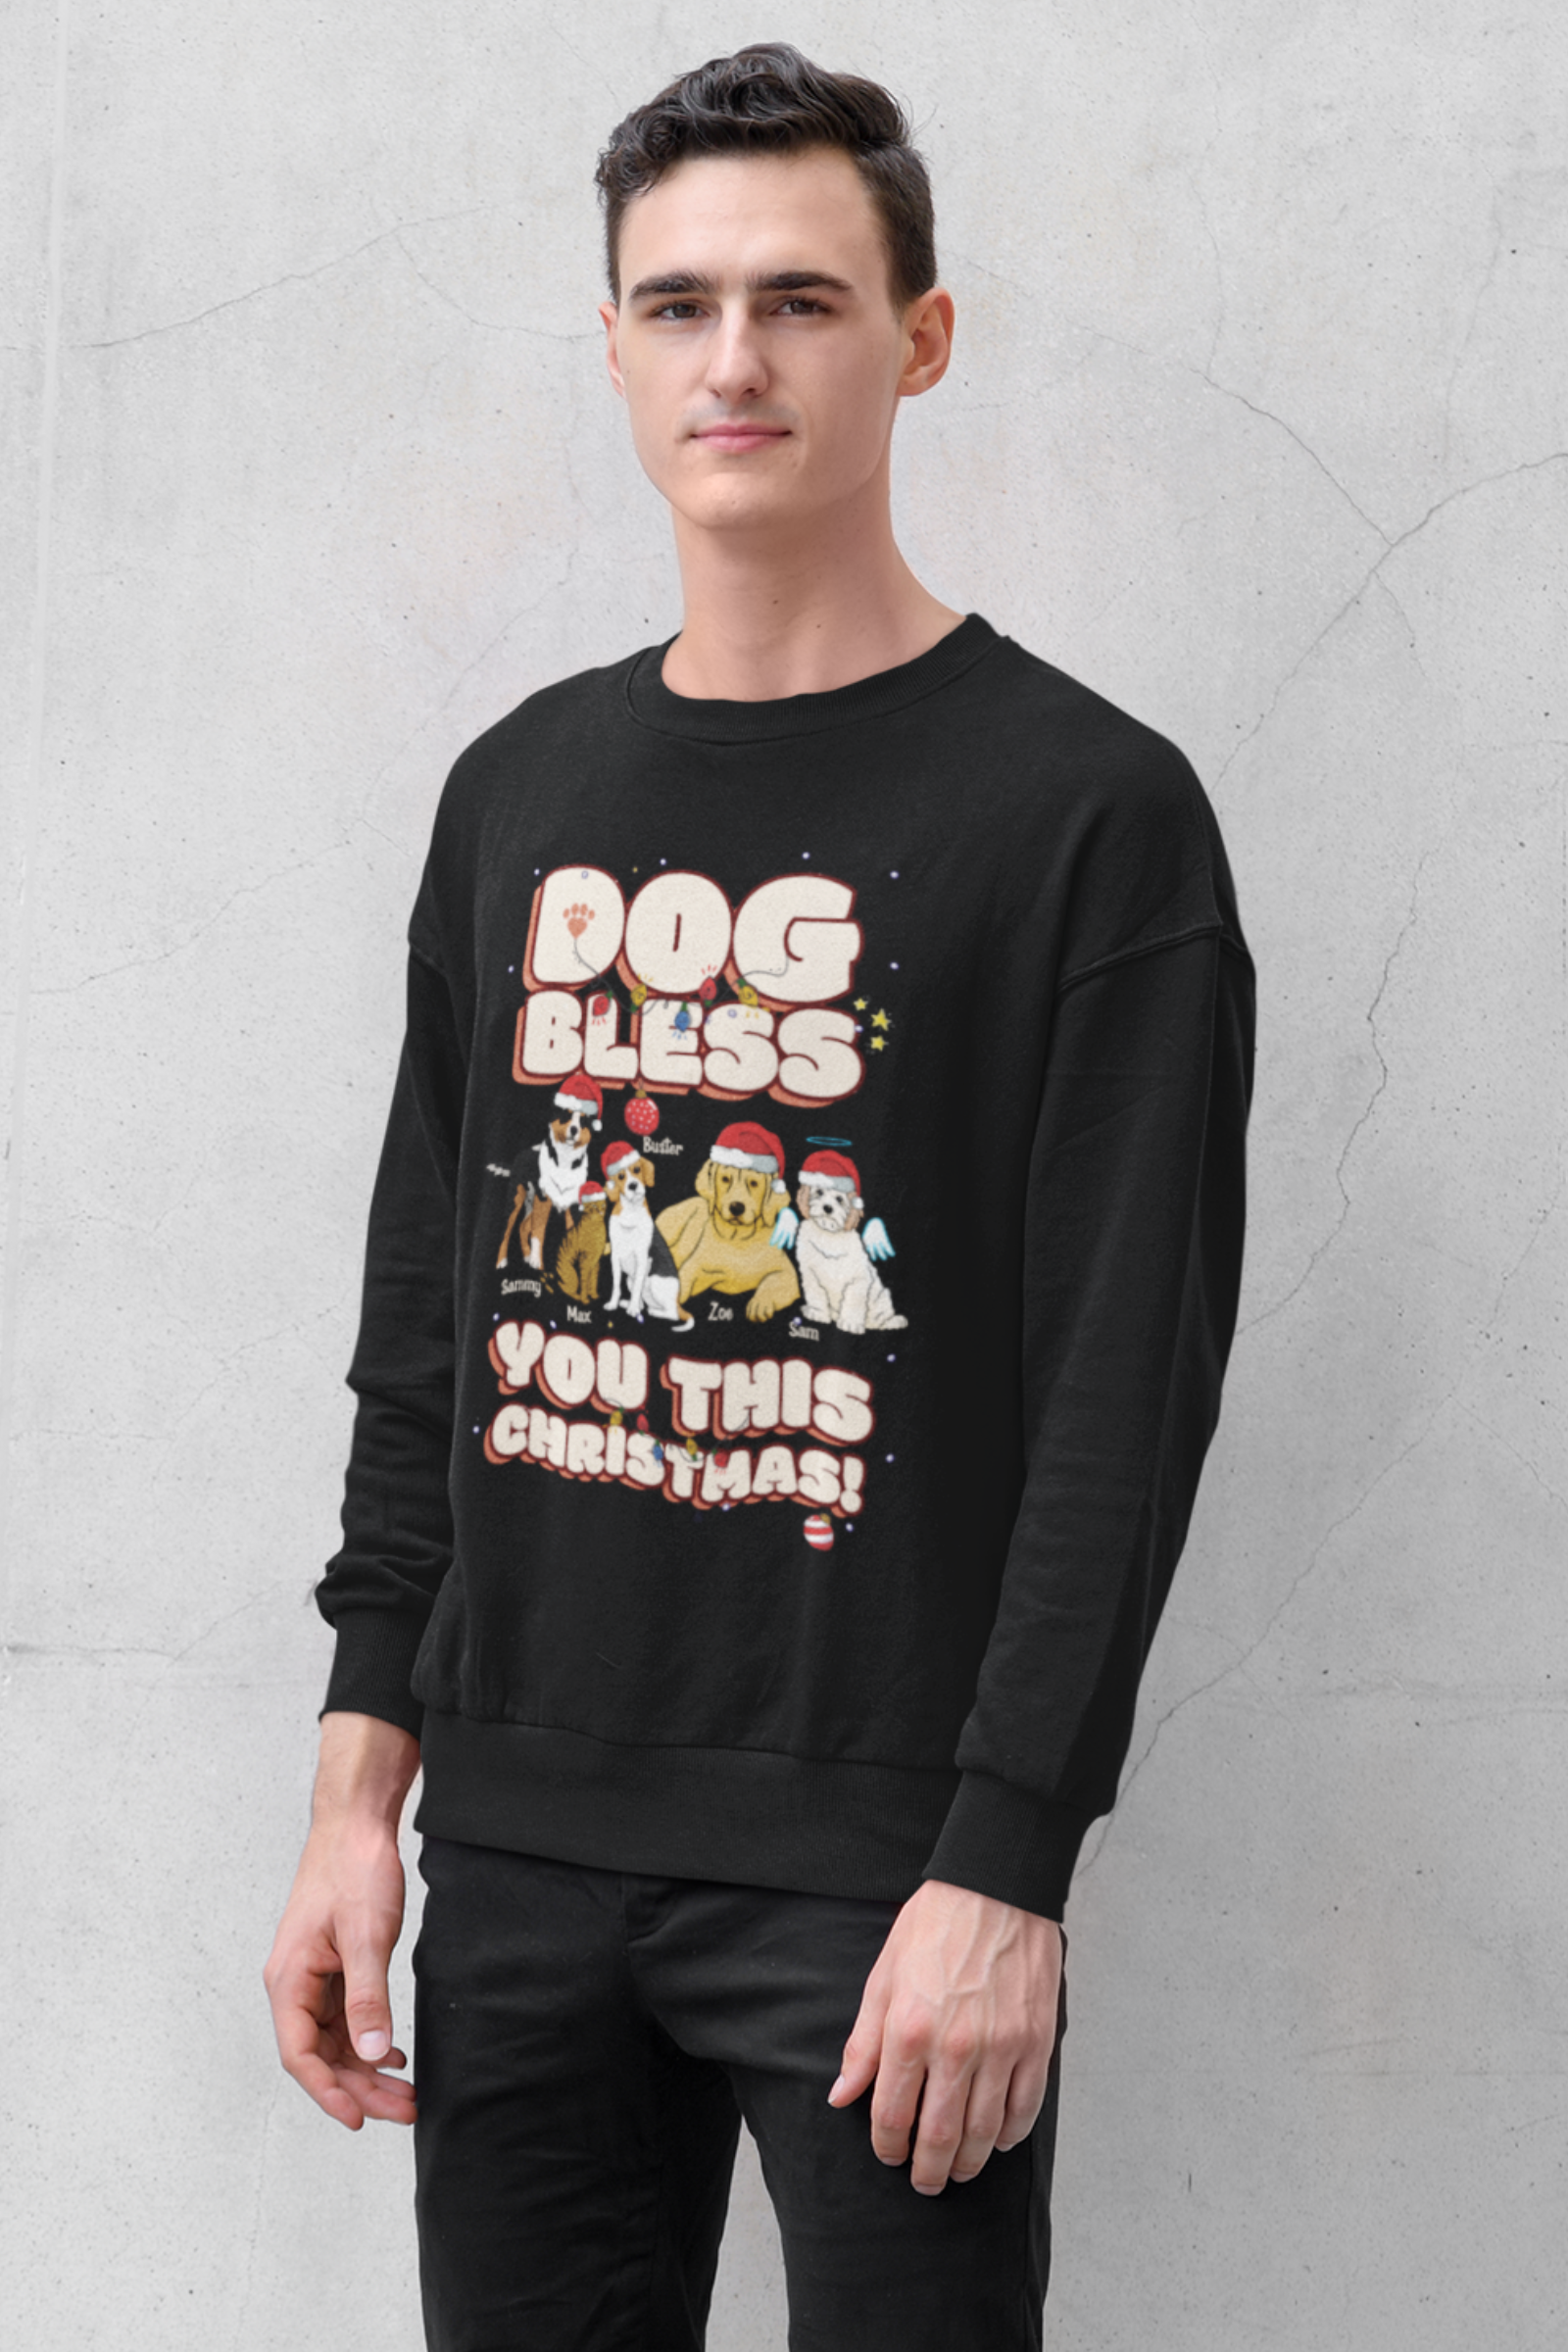 Dog Bless You This Christmas...... Customized Sweatshirt For Pet Lovers